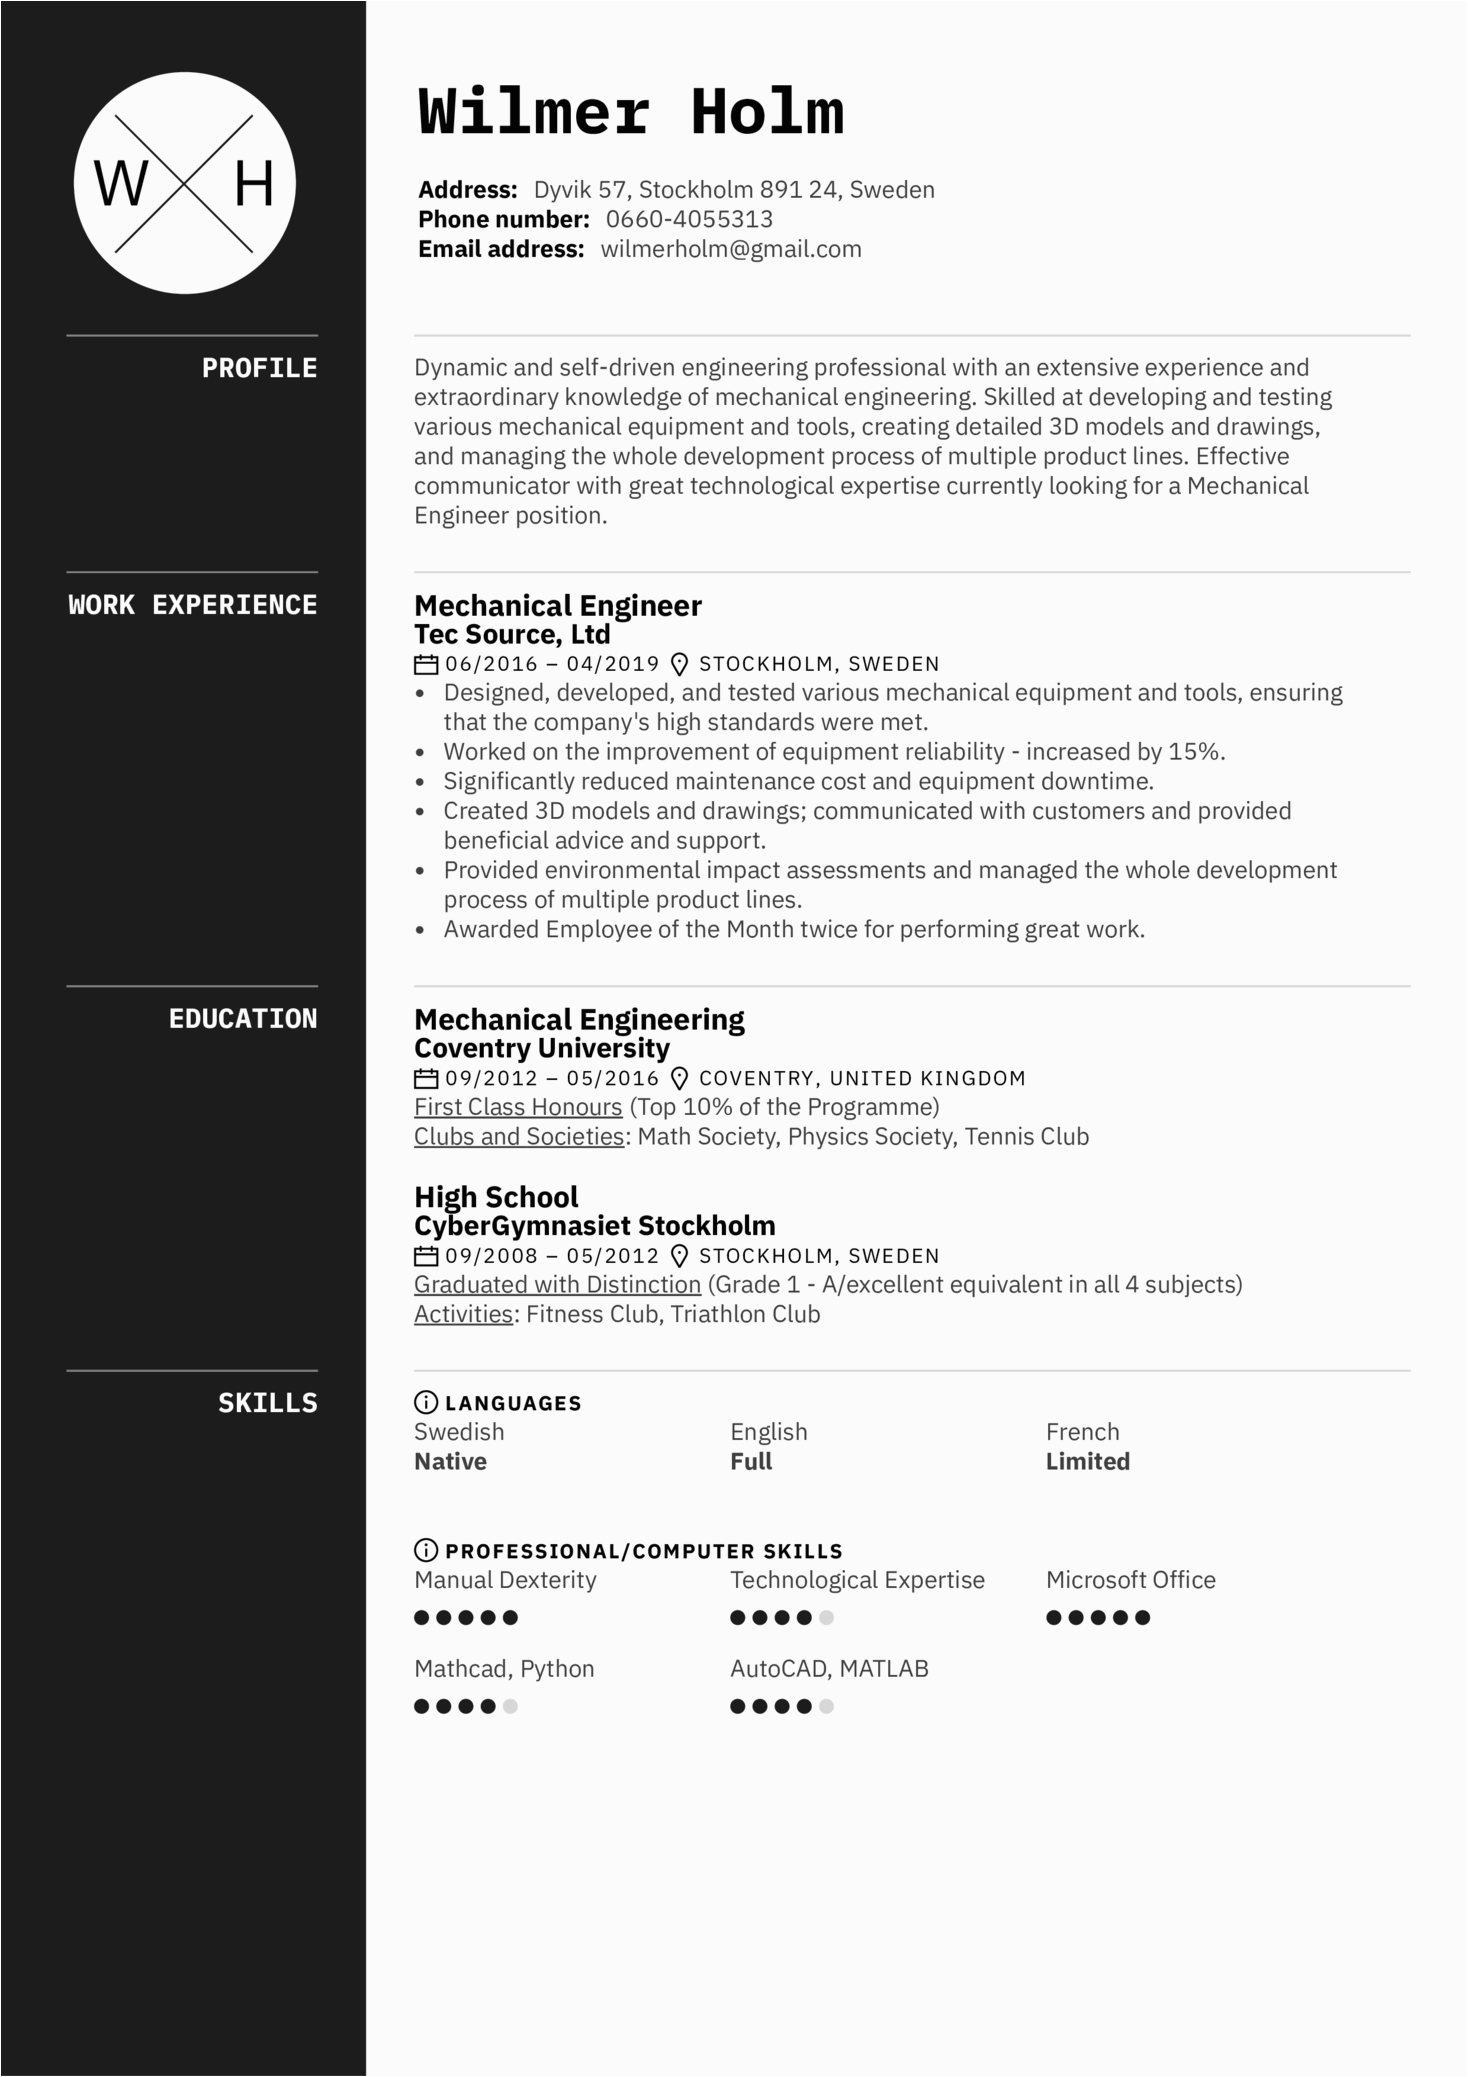 Experience Resume Sample for Mechanical Engineer Mechanical Engineer Resume Sample